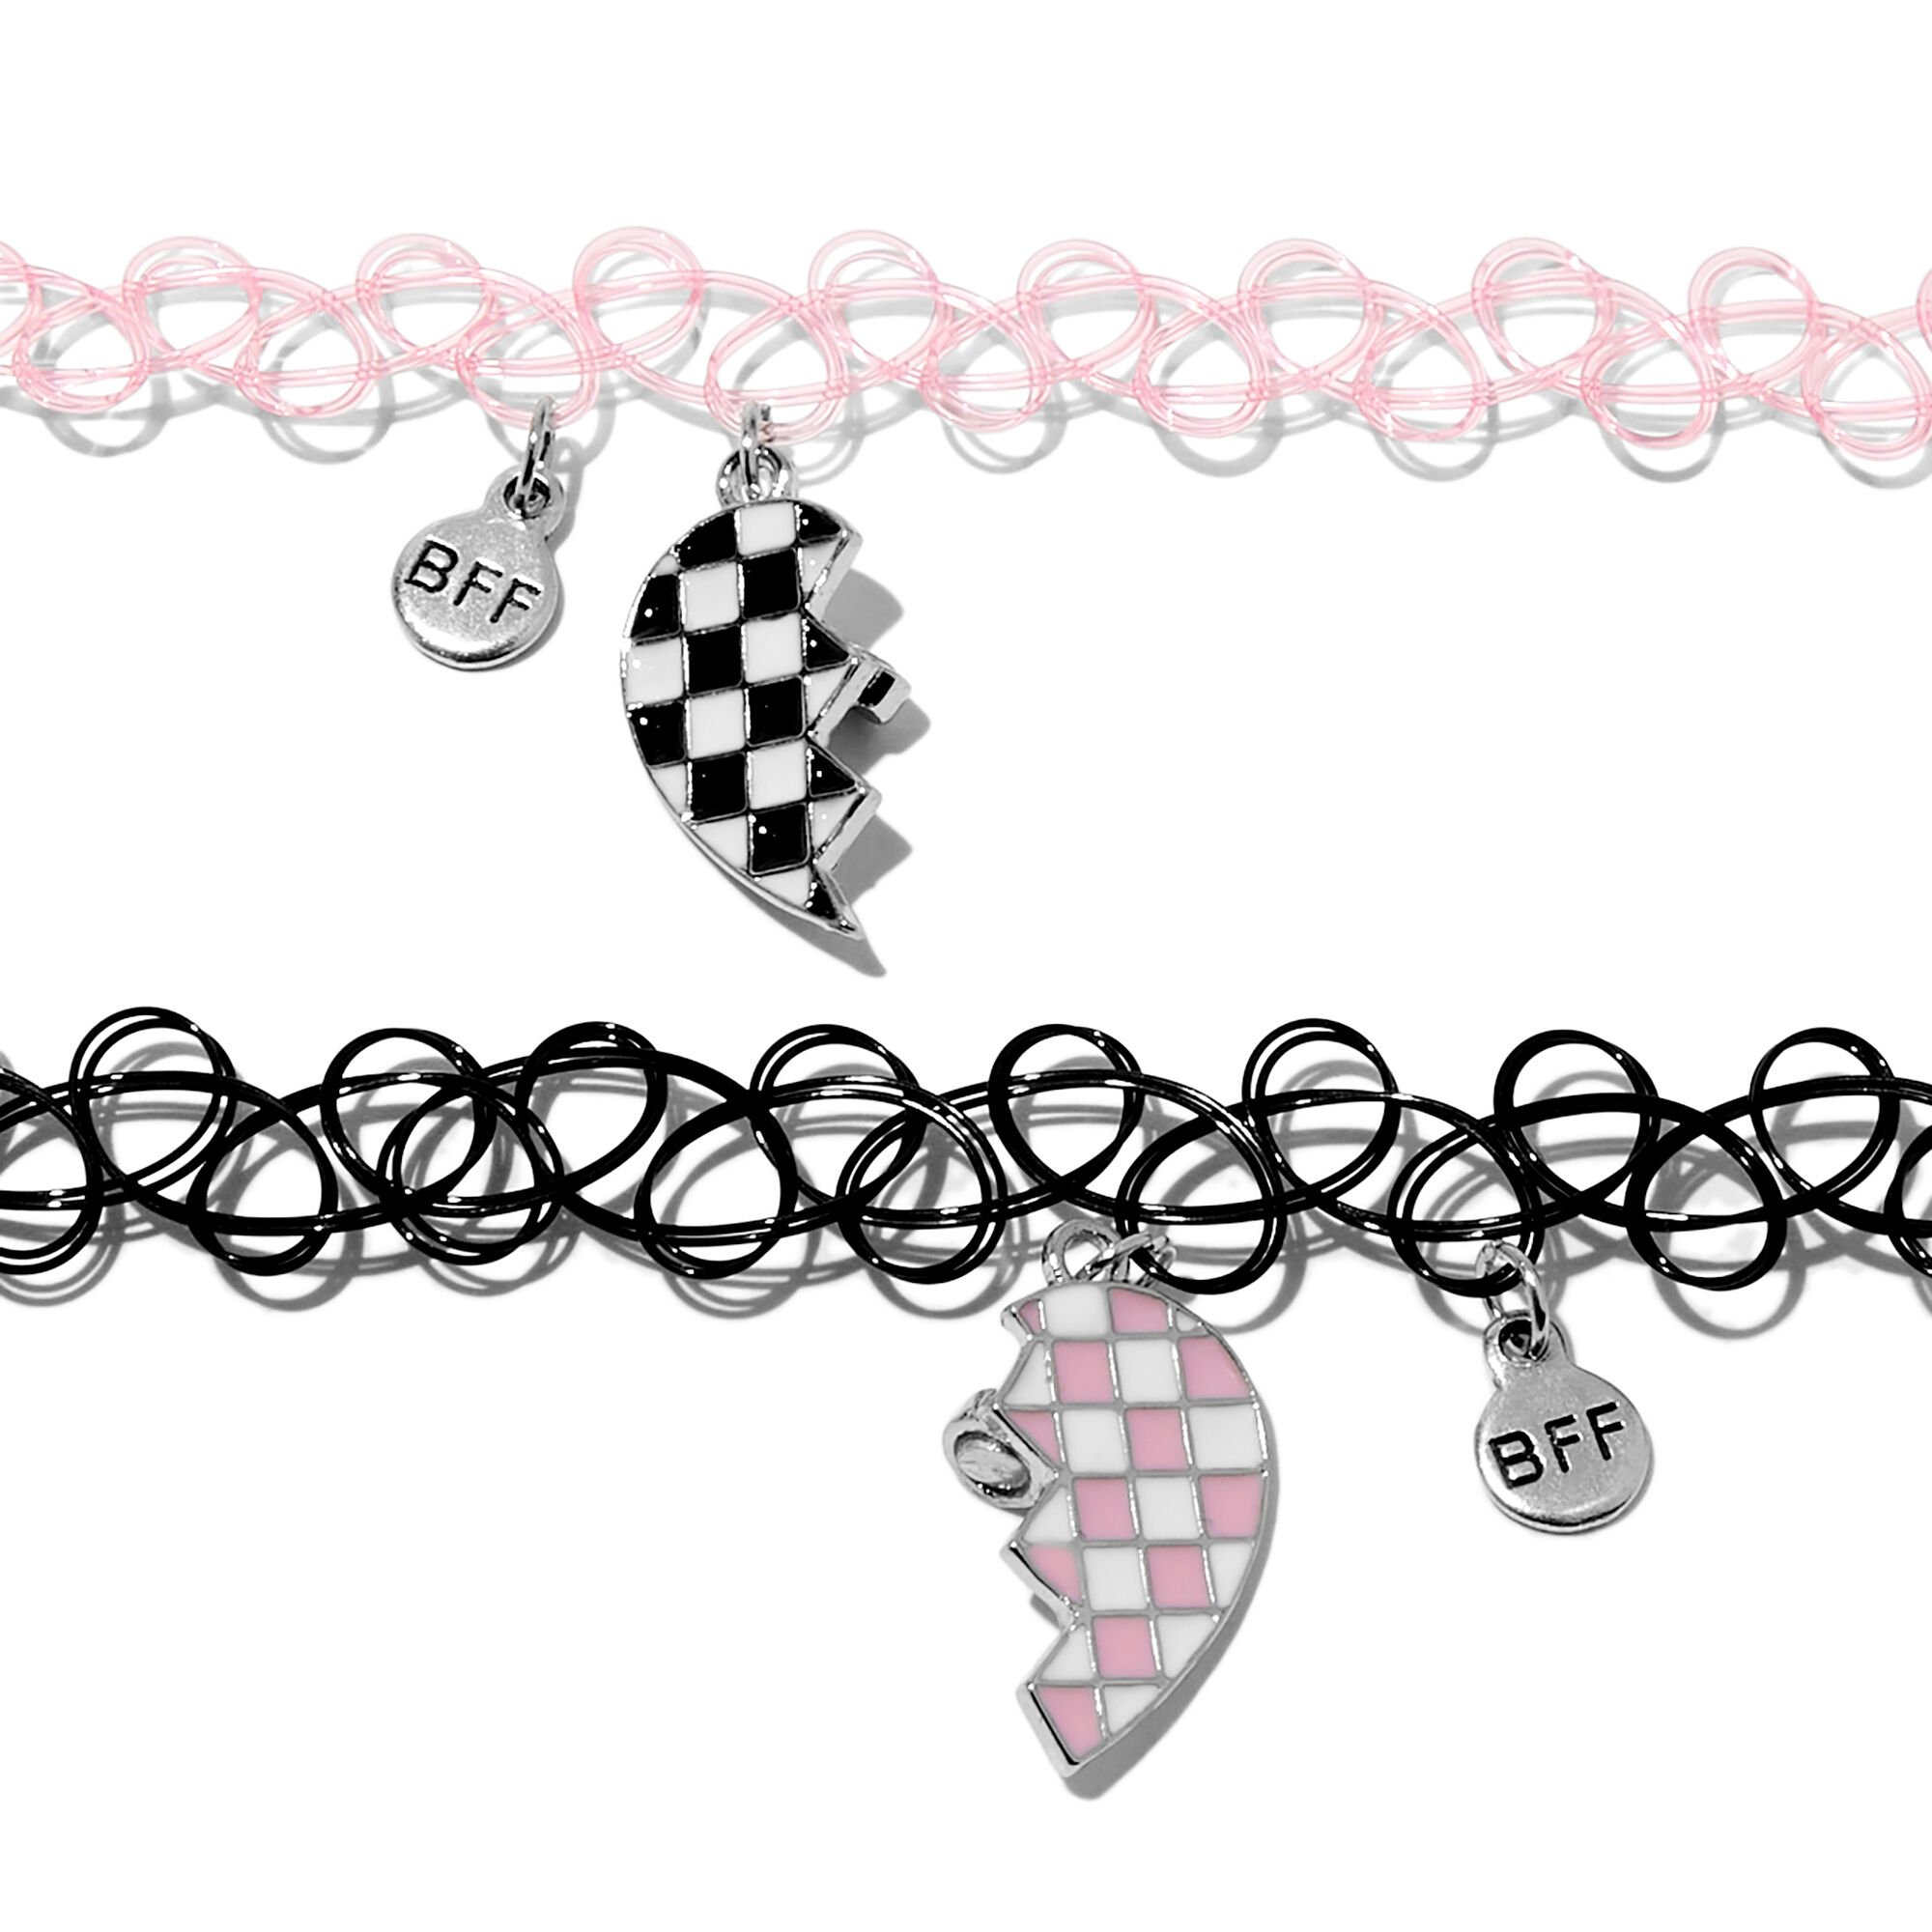 View Claires Best Friends Pink Split Heart Tattoo Choker Necklaces 2 Pack Black information